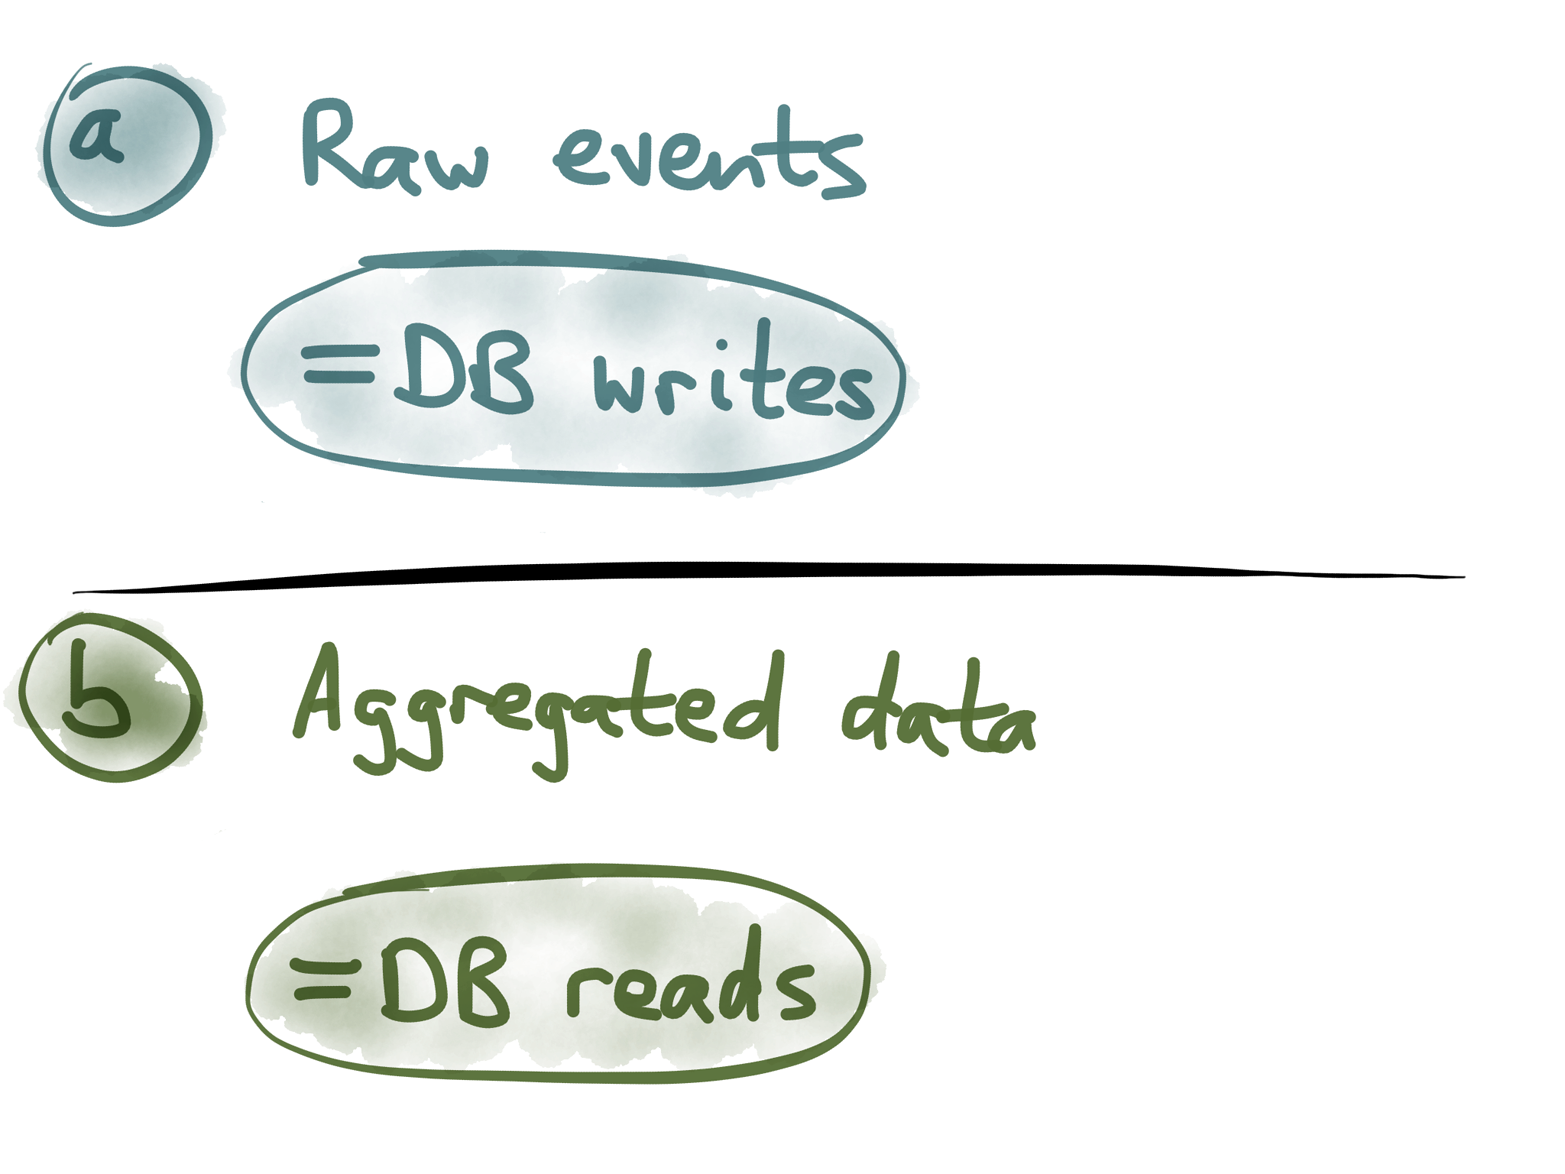 Events are optimized for writes; aggregated values are optimized for reads.